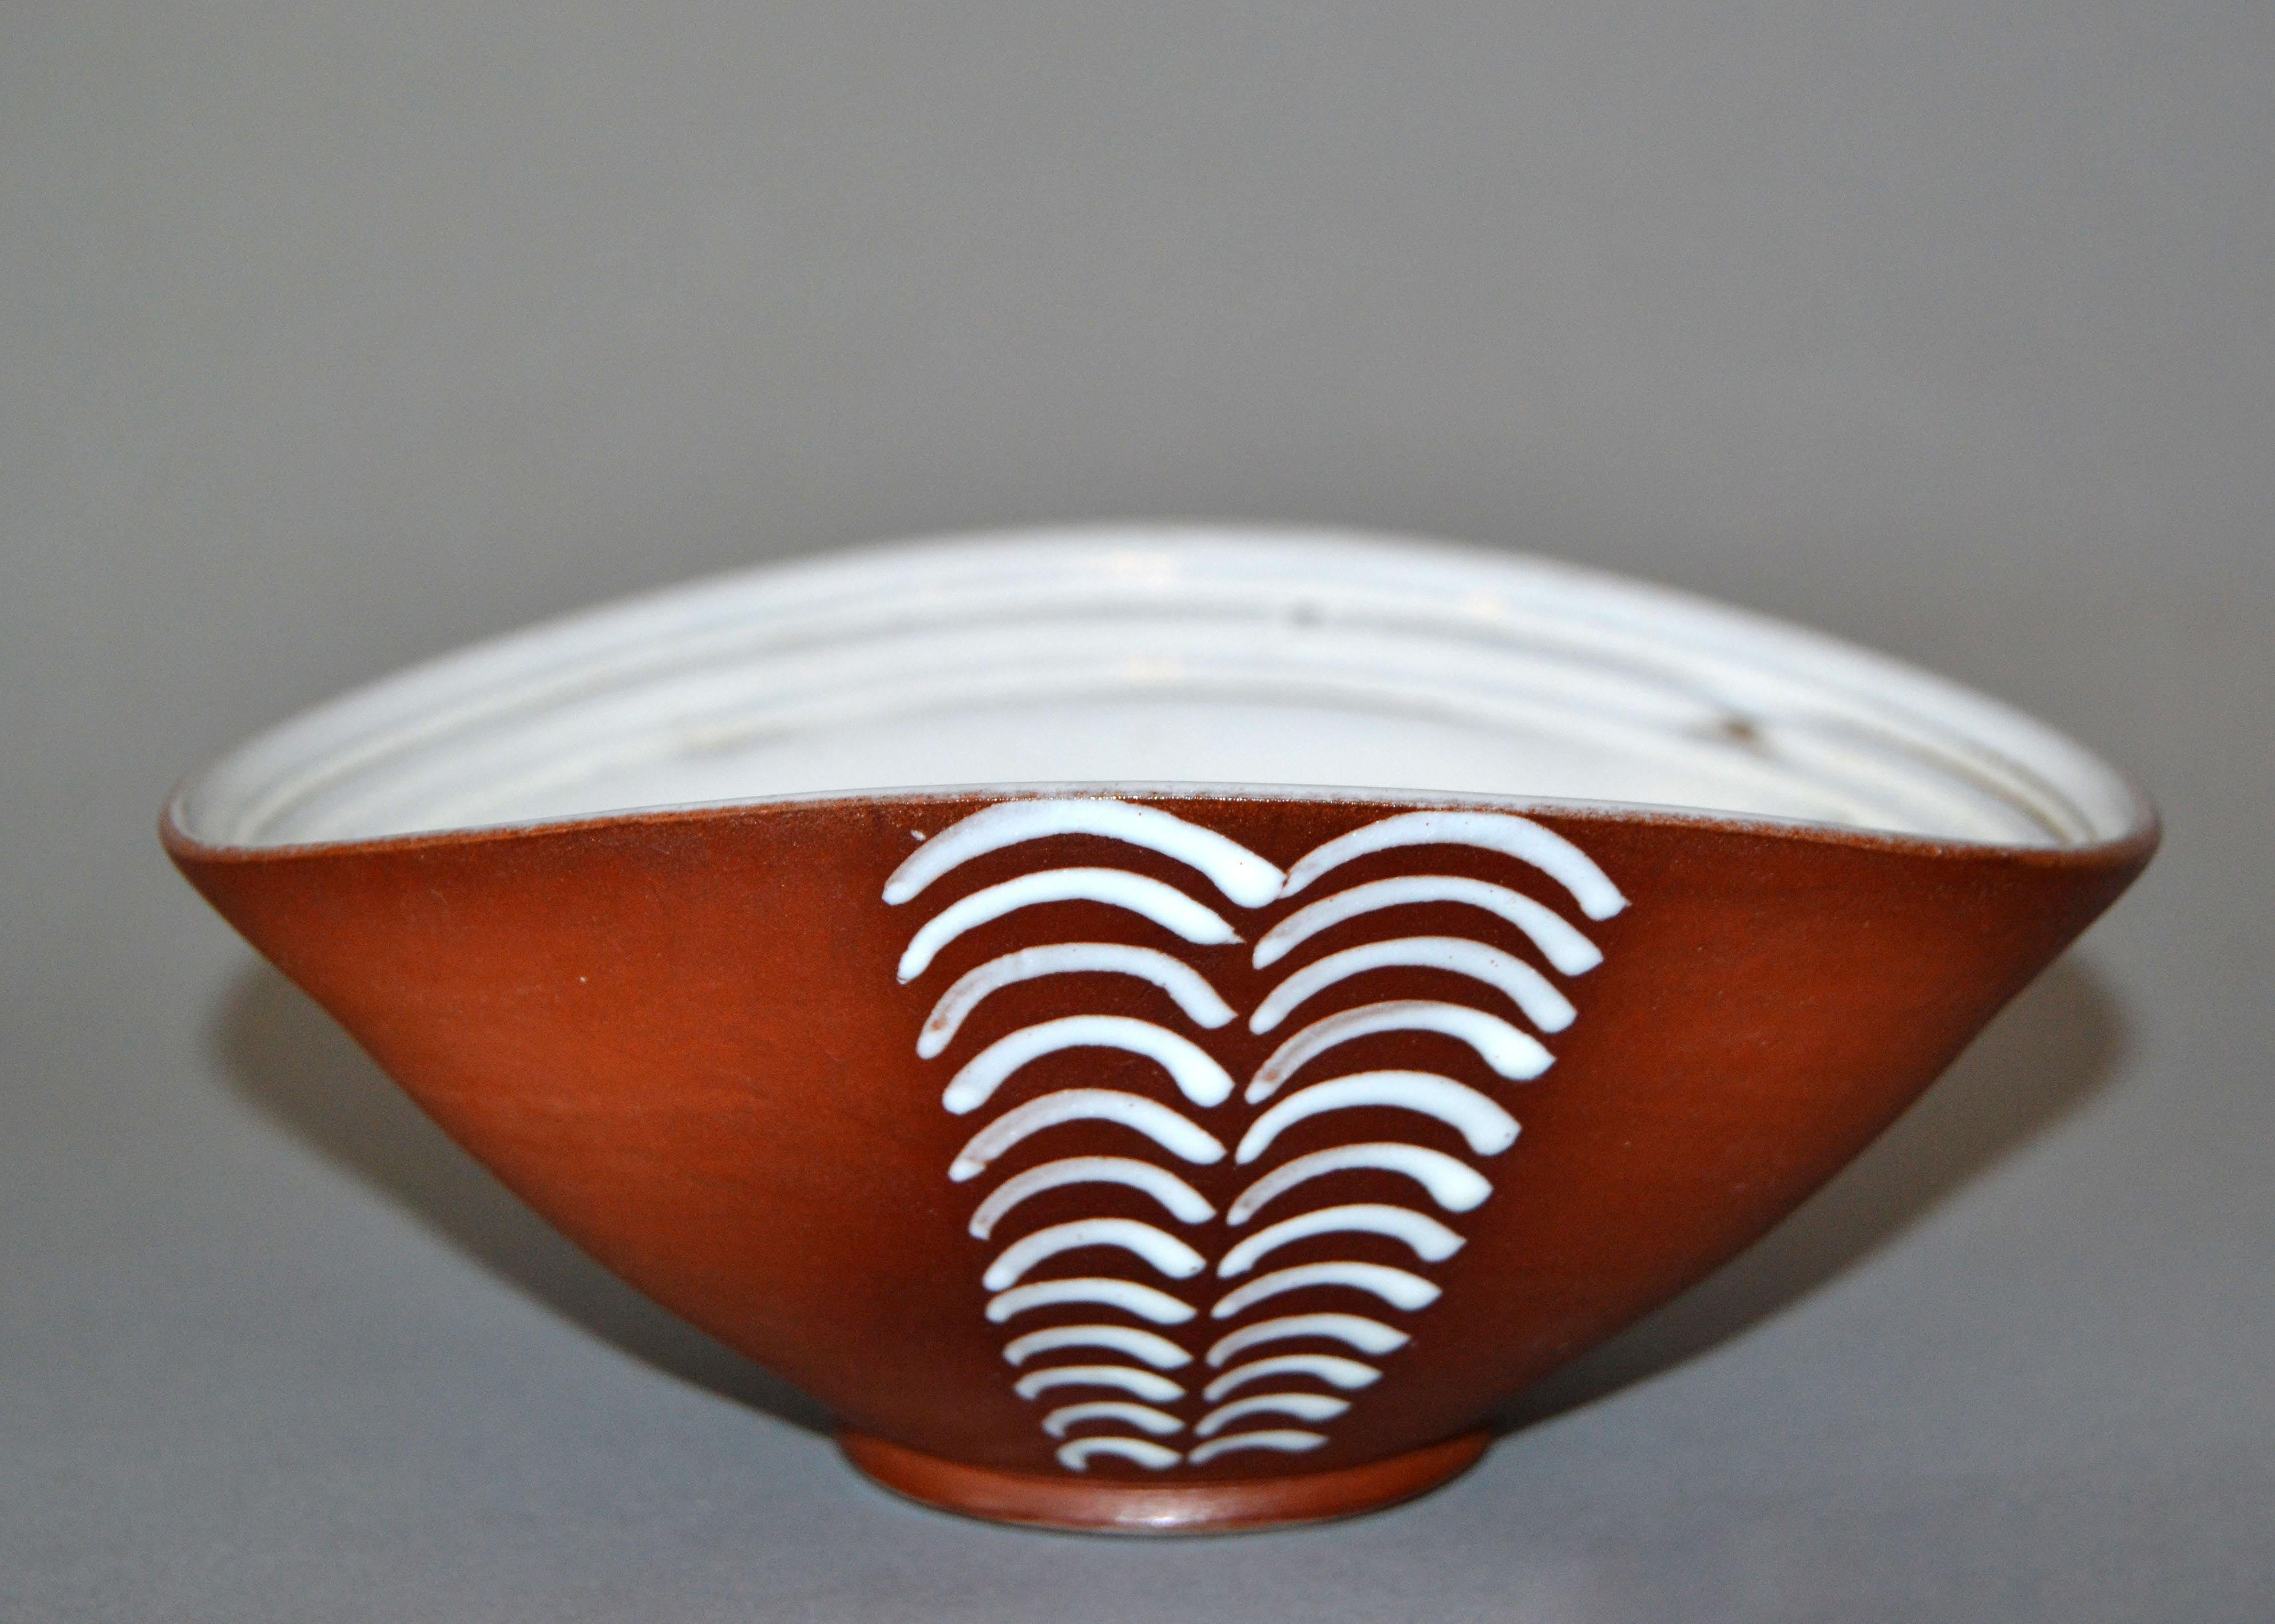 Vintage Scandinavian Modern matte brown art pottery decorative bowl with white glazed lines.
Marked by Artist underneath.
Useful to serve your favorite nuts or fruit.
  